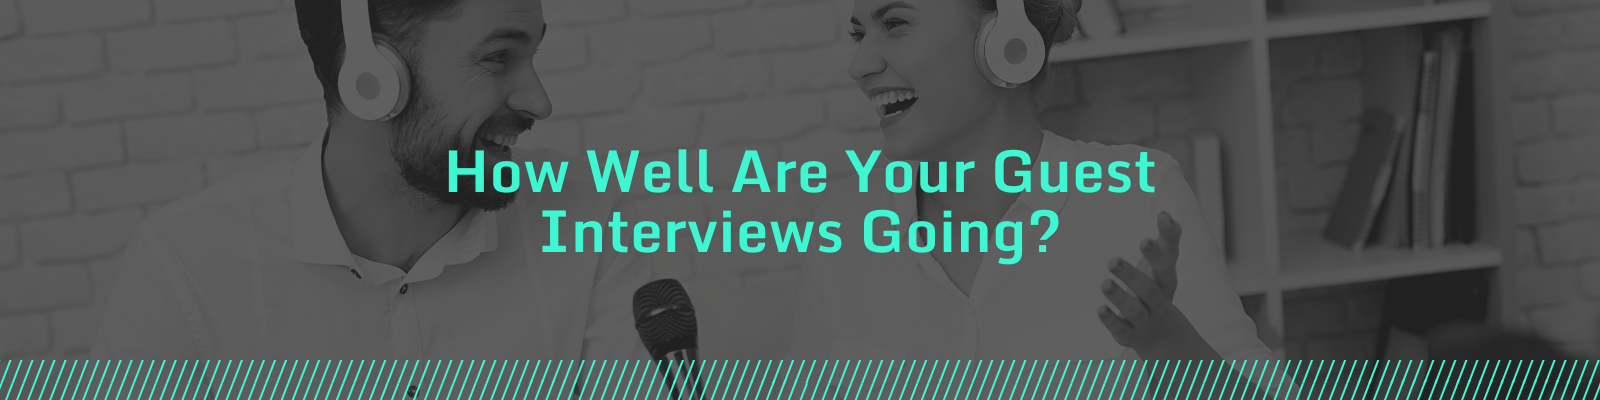 How Well Are Your Guest Interviews Going?